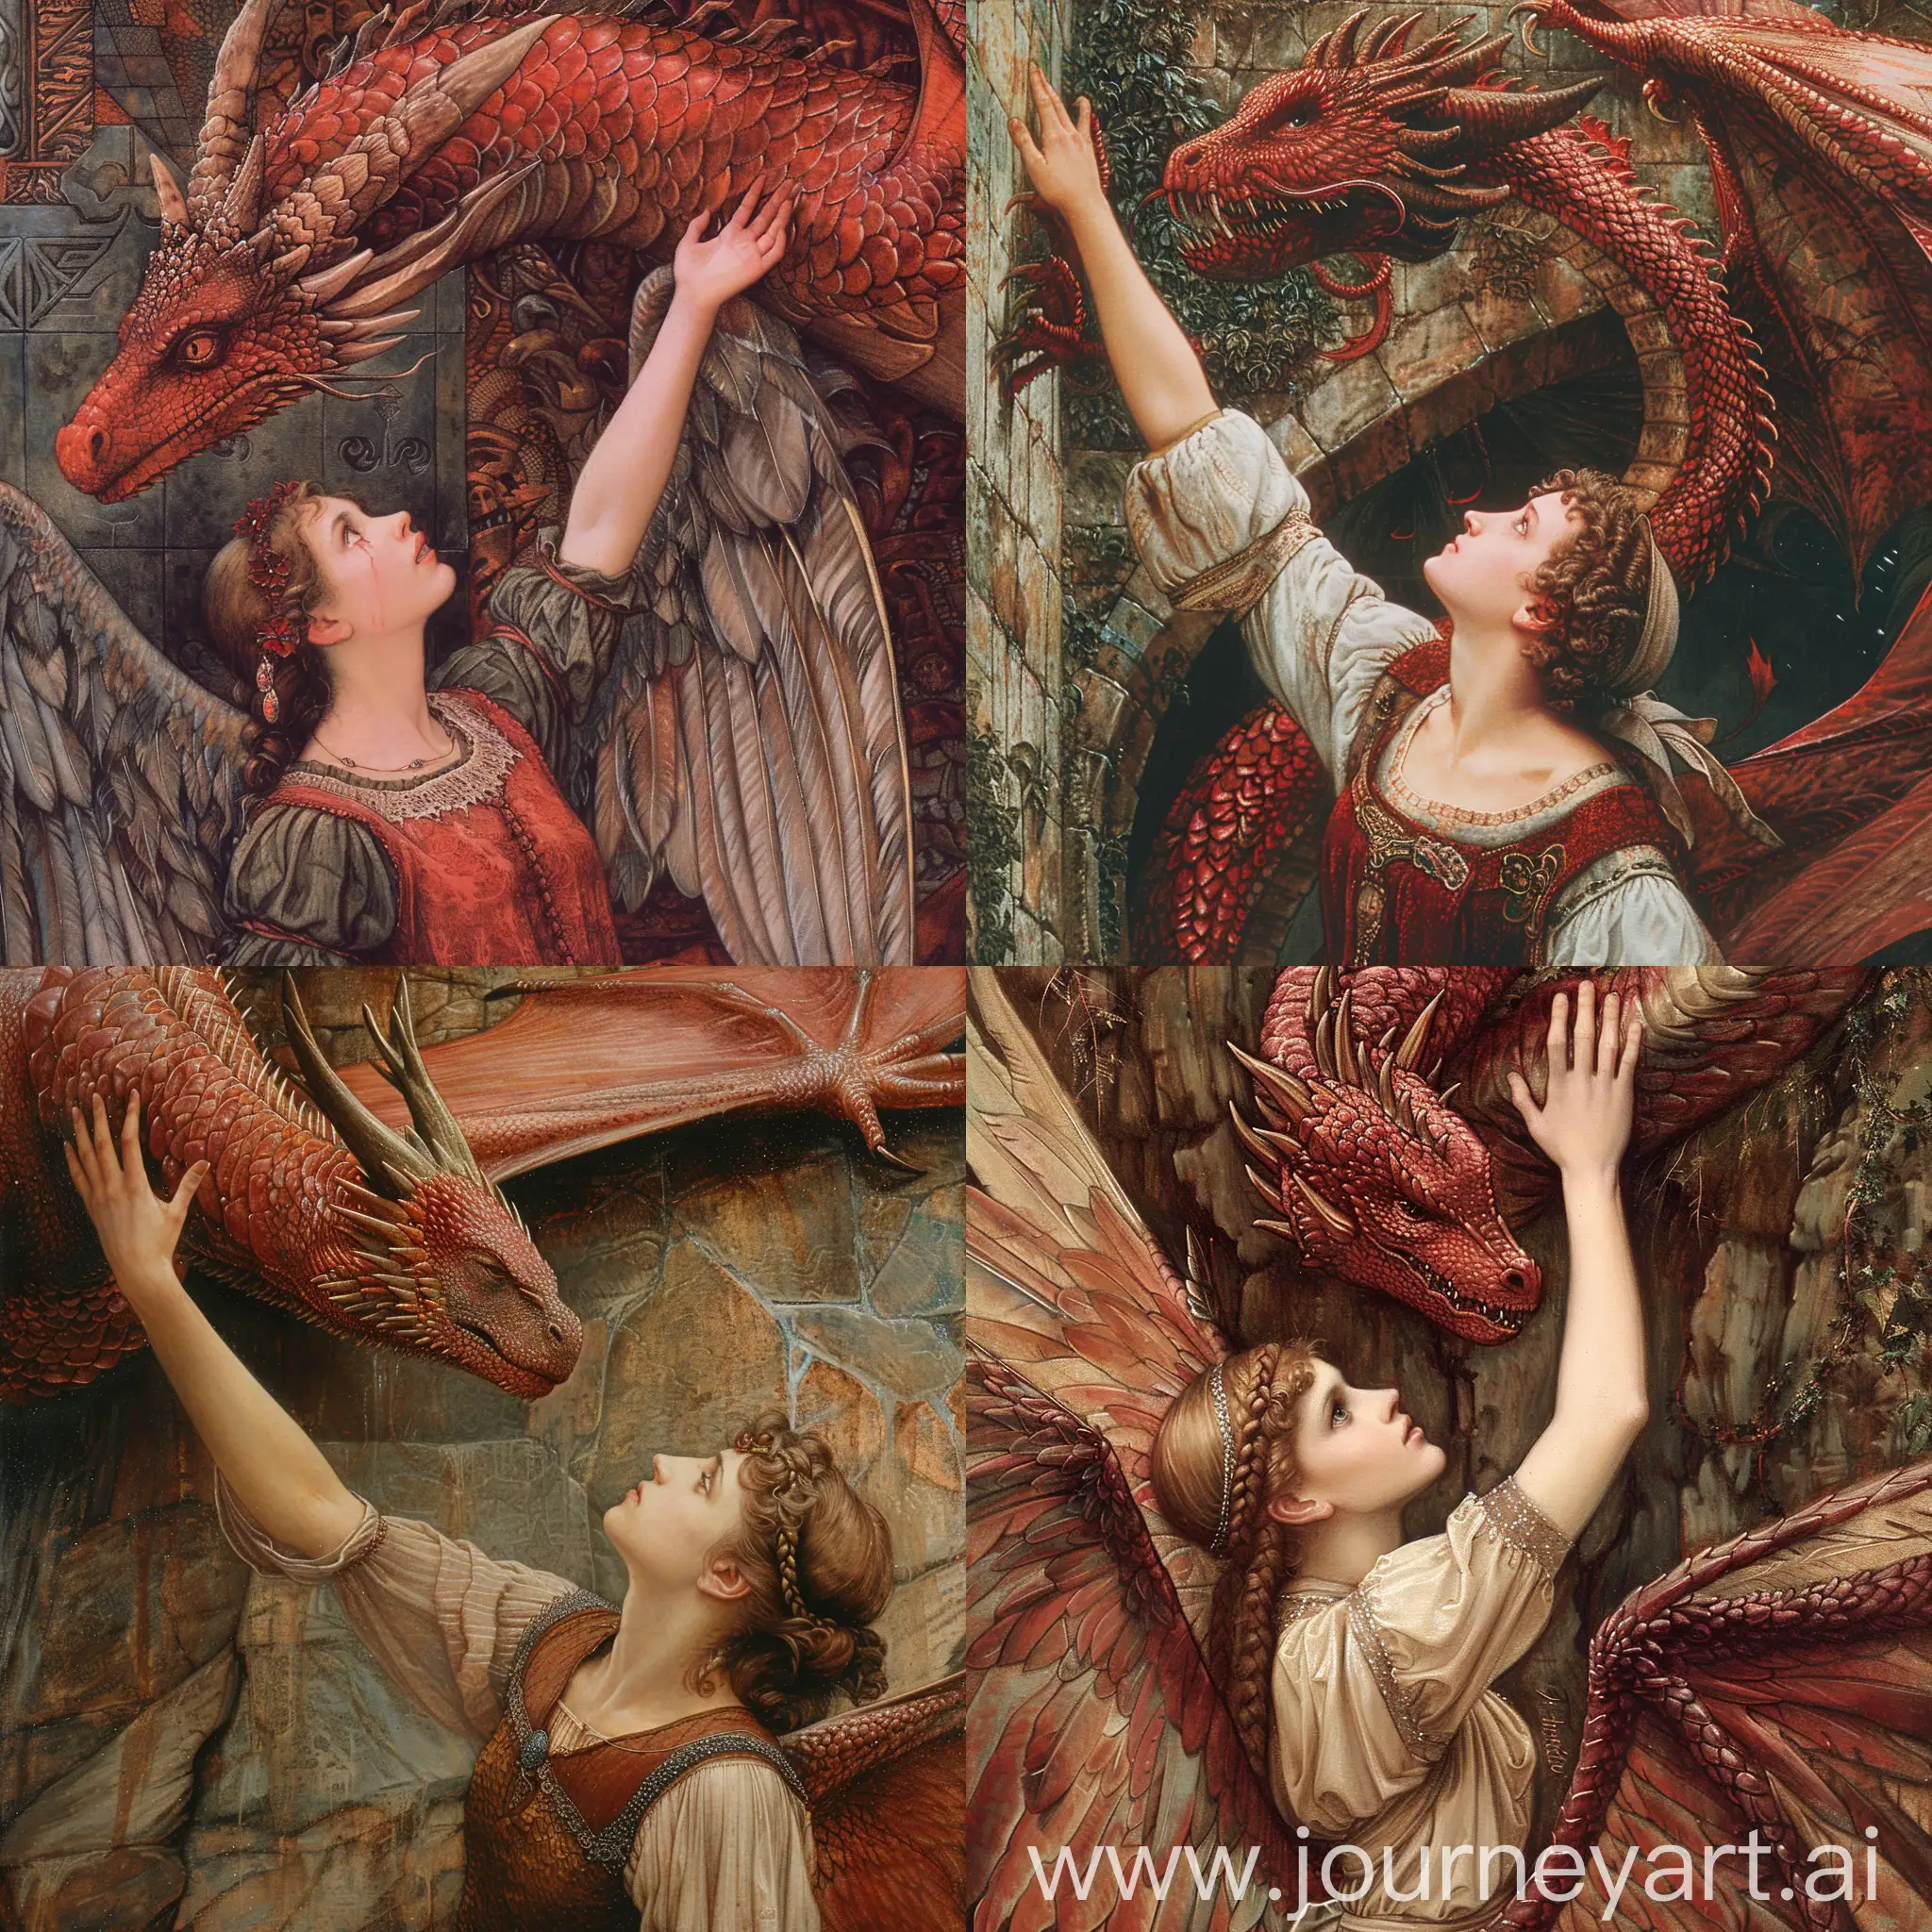 A beautiful medieval angel woman reaching up.to touch a large red dragon. Pre-Raphaelite